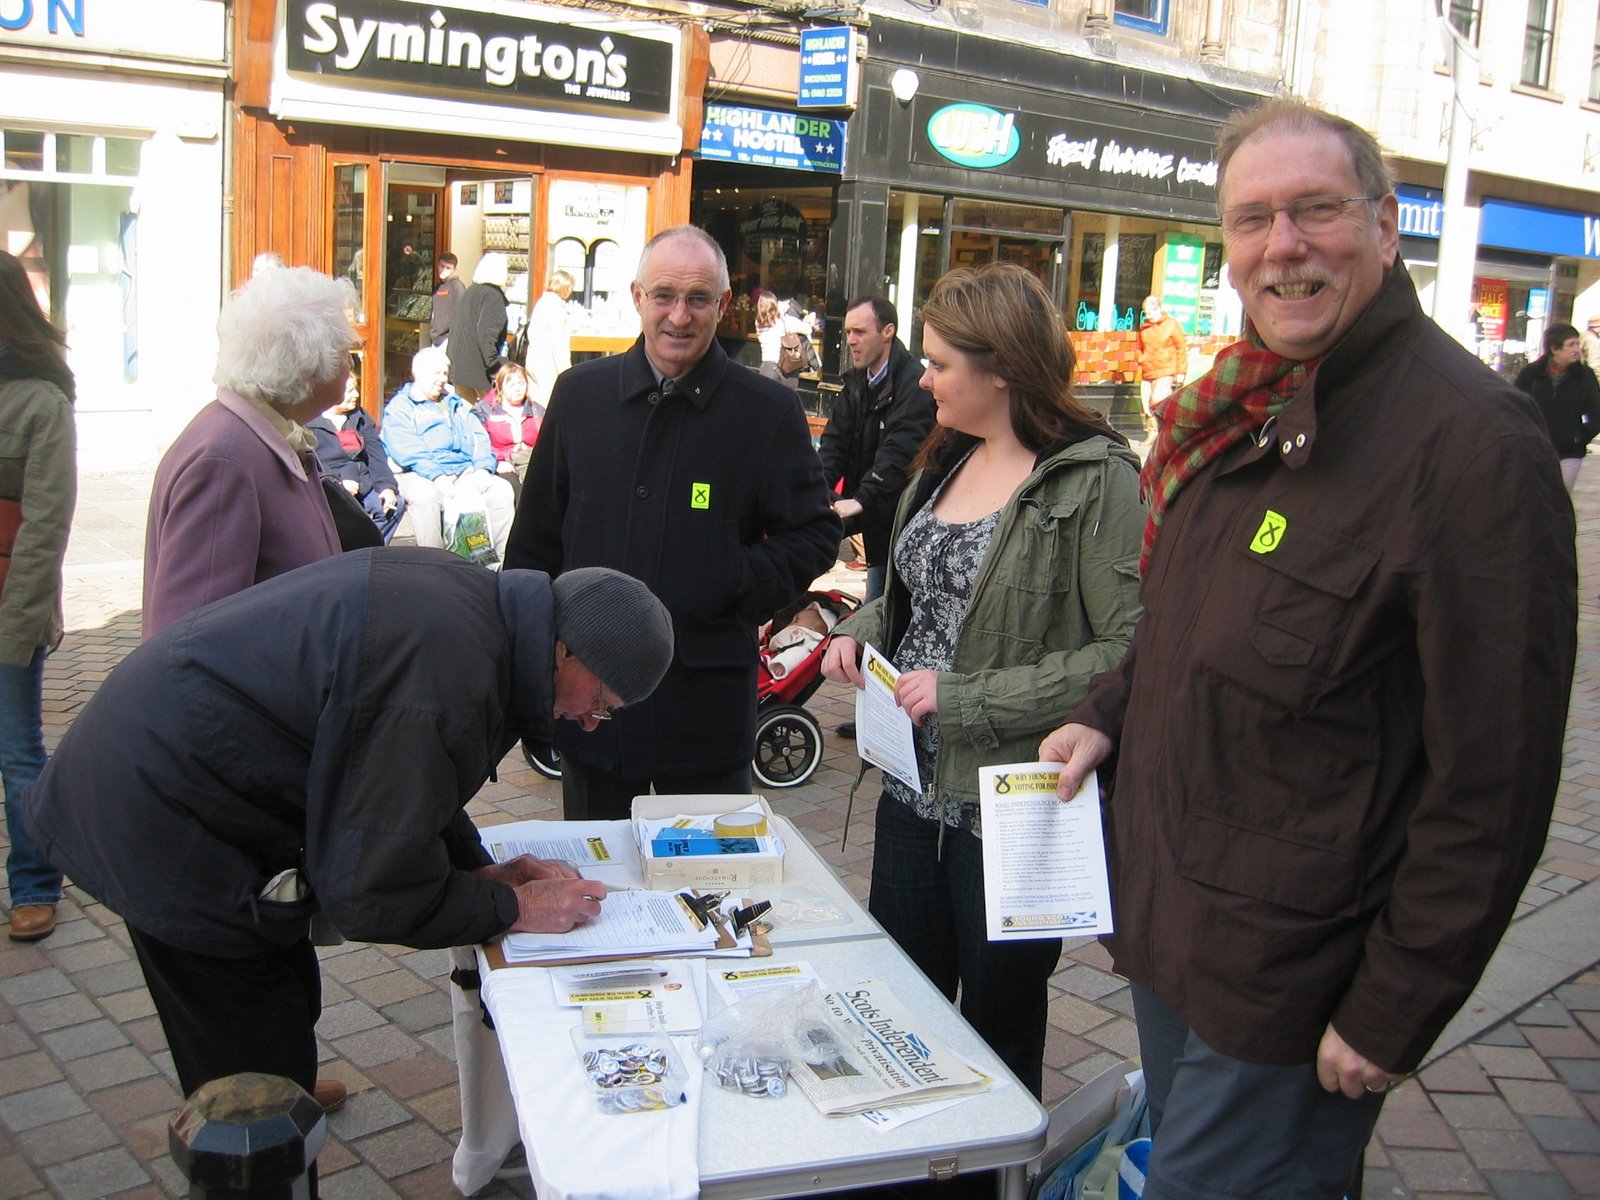 [Campaigning+with+YSI+Inverness+High+St.+Sat+28-03-08]